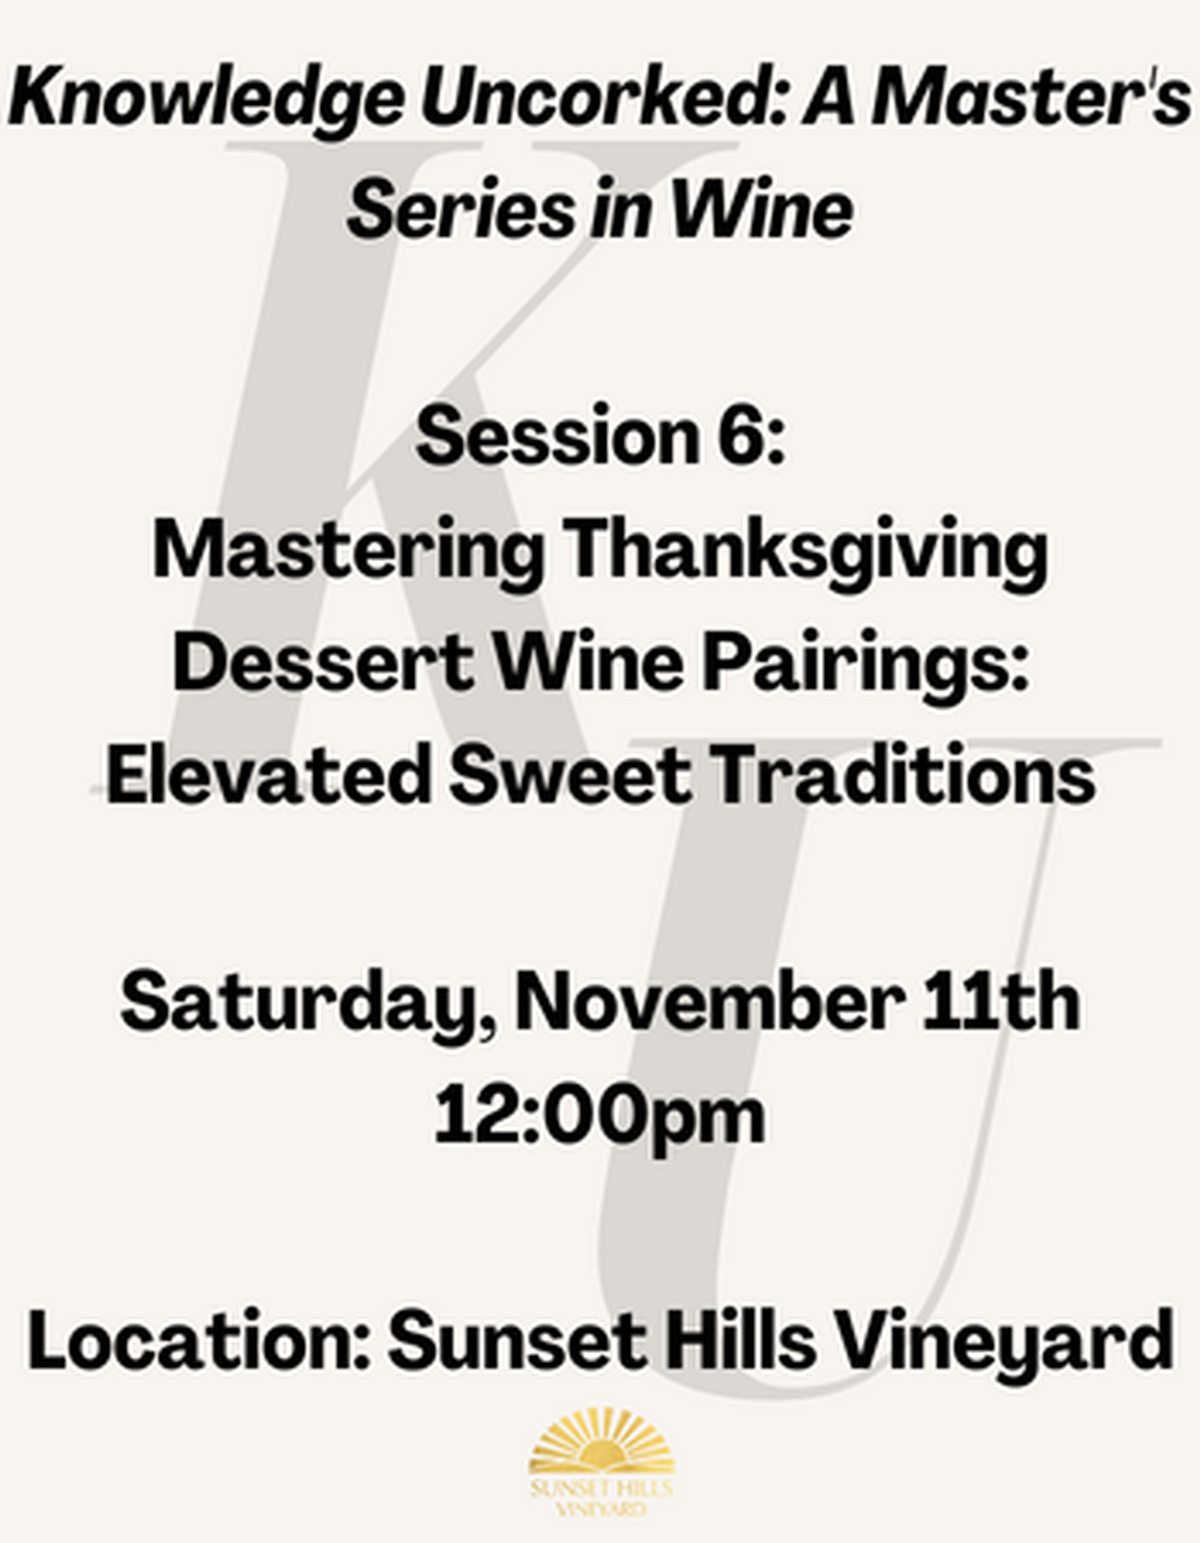 Mastering Thanksgiving Dessert Wine Pairings: Elevated Sweet Traditions (12:00pm)